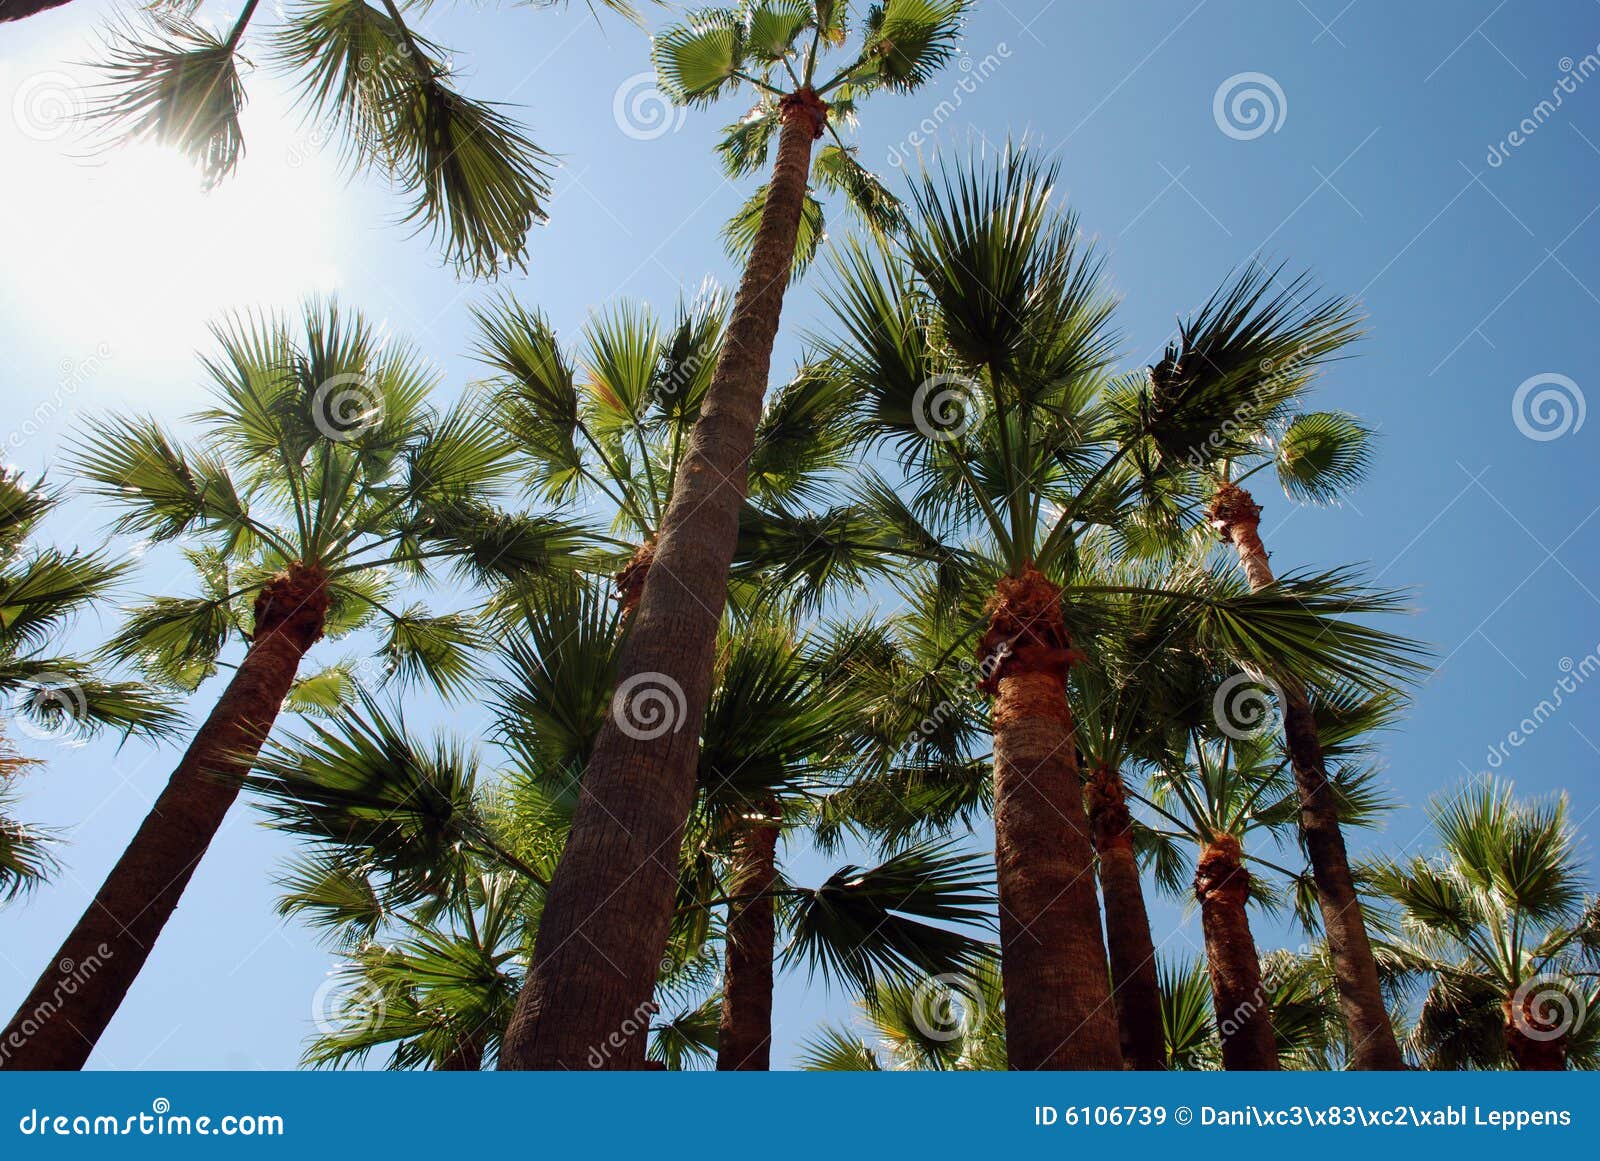 palmtrees on the beach in cannes